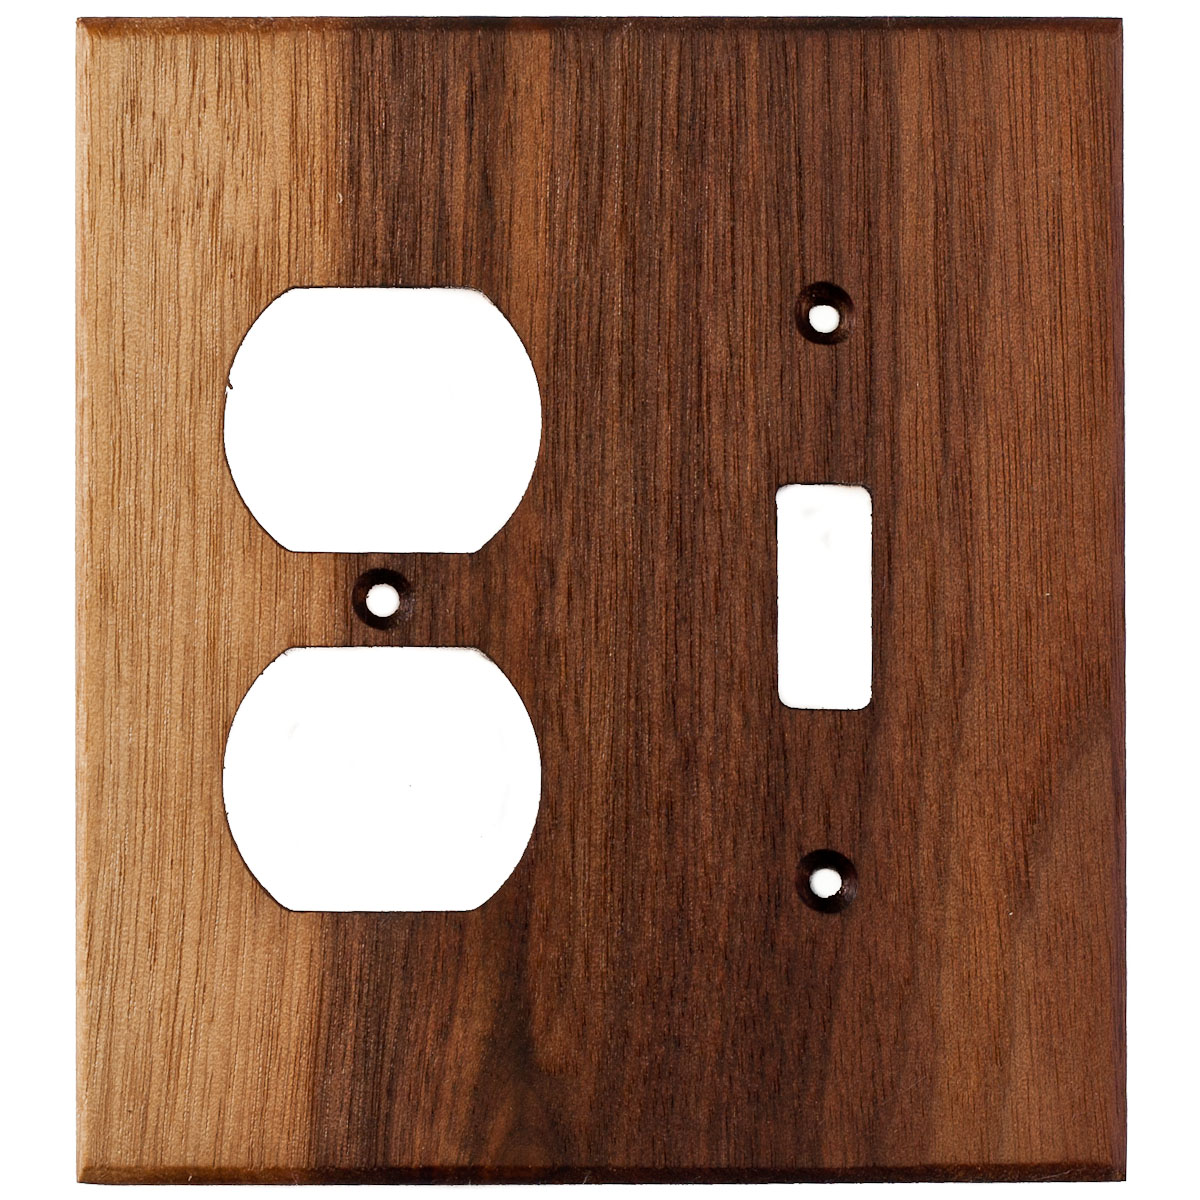 Black Walnut Wood Wall Plate - 2 Gang Combo - Light Switch, Duplex Outlet  Cover